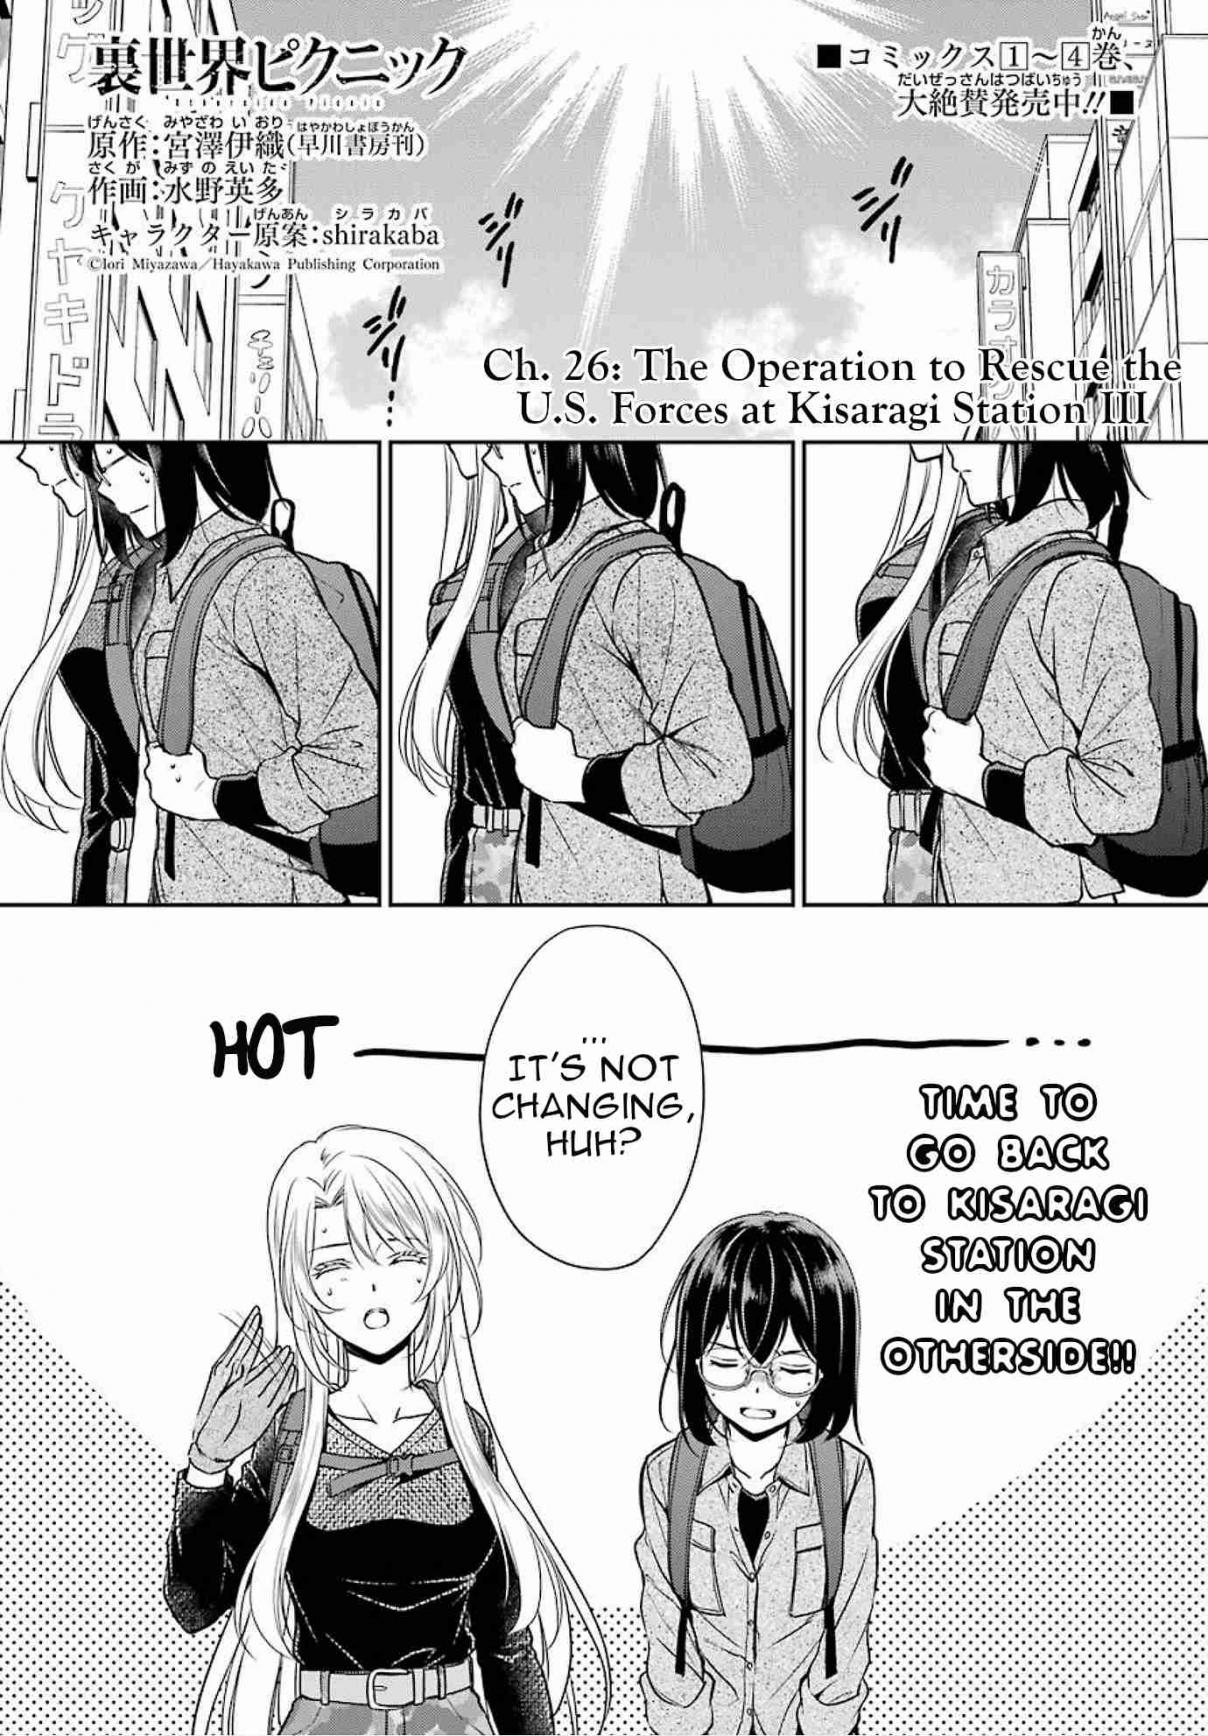 Urasekai Picnic Vol. 5 Ch. 26 The Operation to Rescue the US Forces at Kisaragi Station III